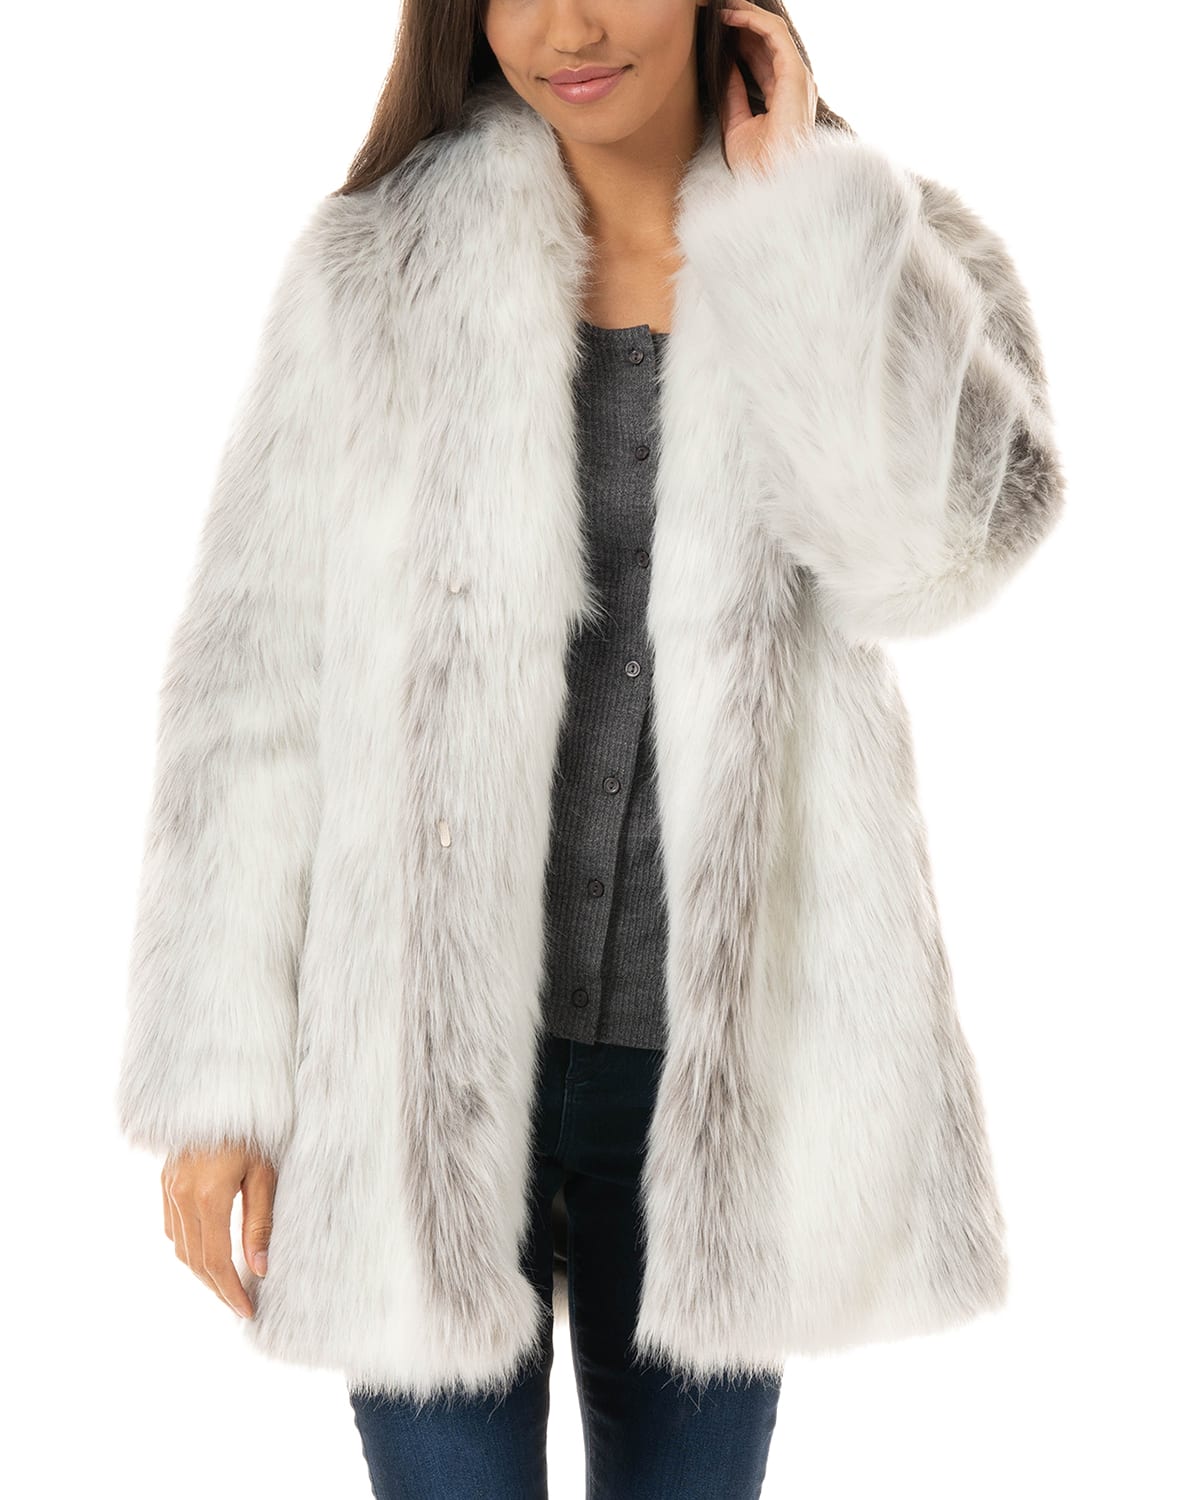 SPECIAL PRICE DROP Winter Jacket Ivory champagne Girl's faux fur coat Jacket 